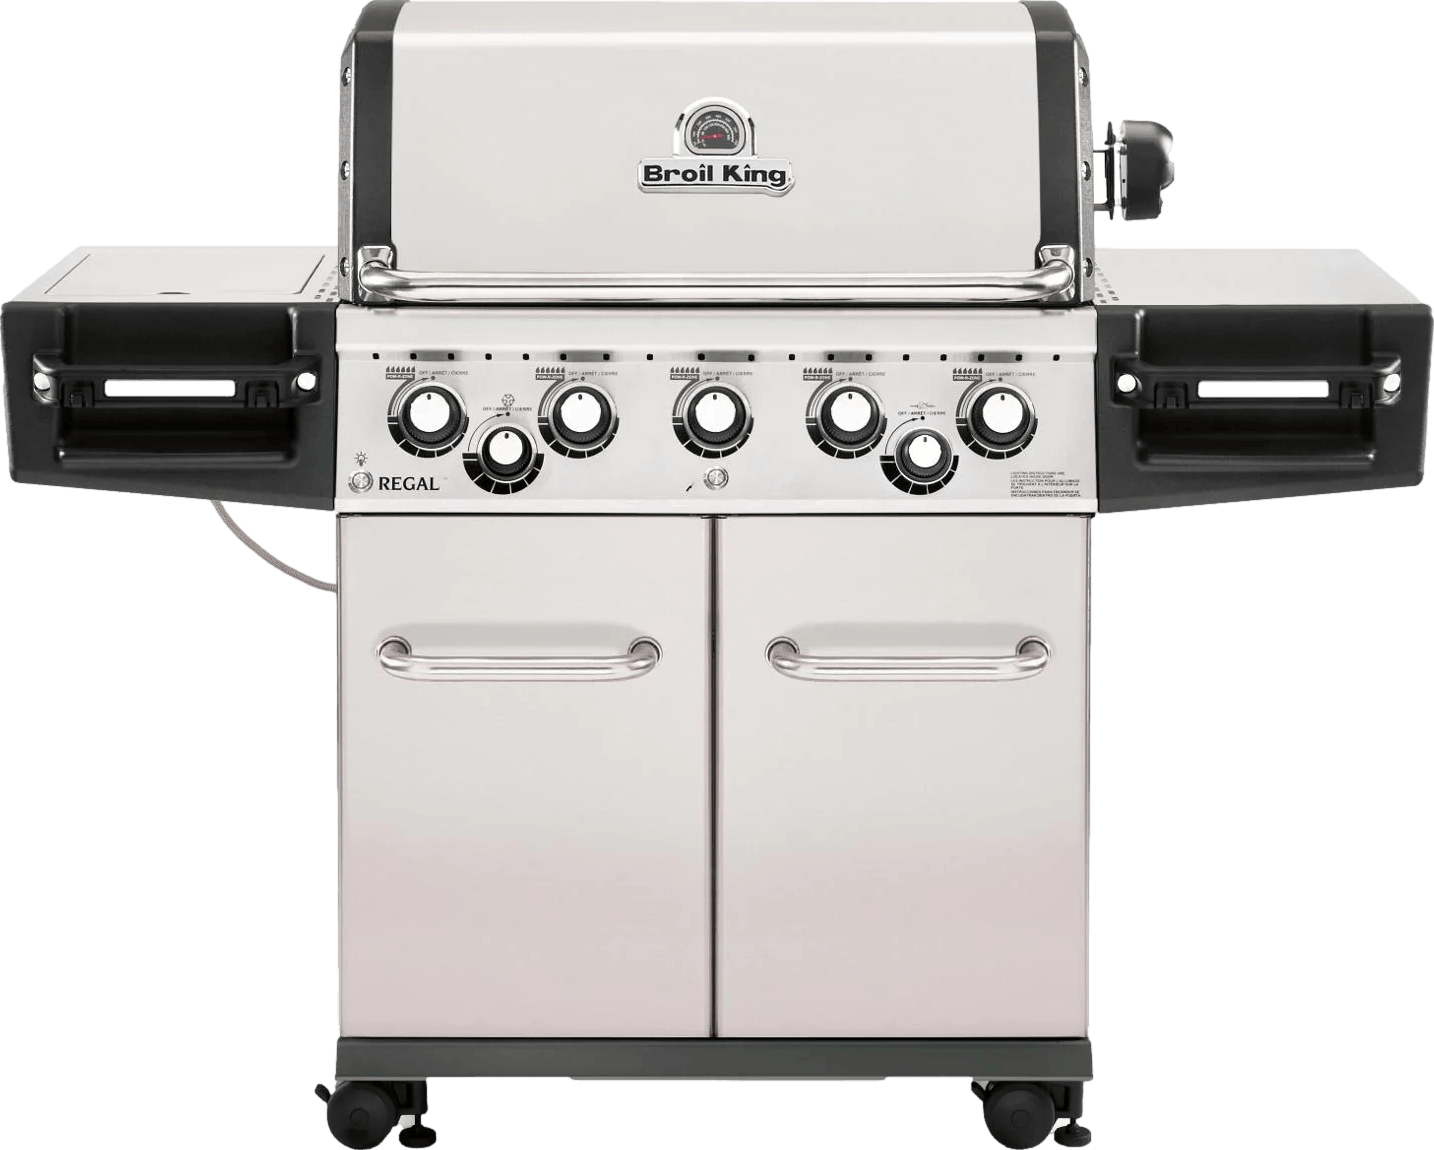 Broil King Regal Pro S590 Gas Grill with Rotisserie and Side Burner · Propane